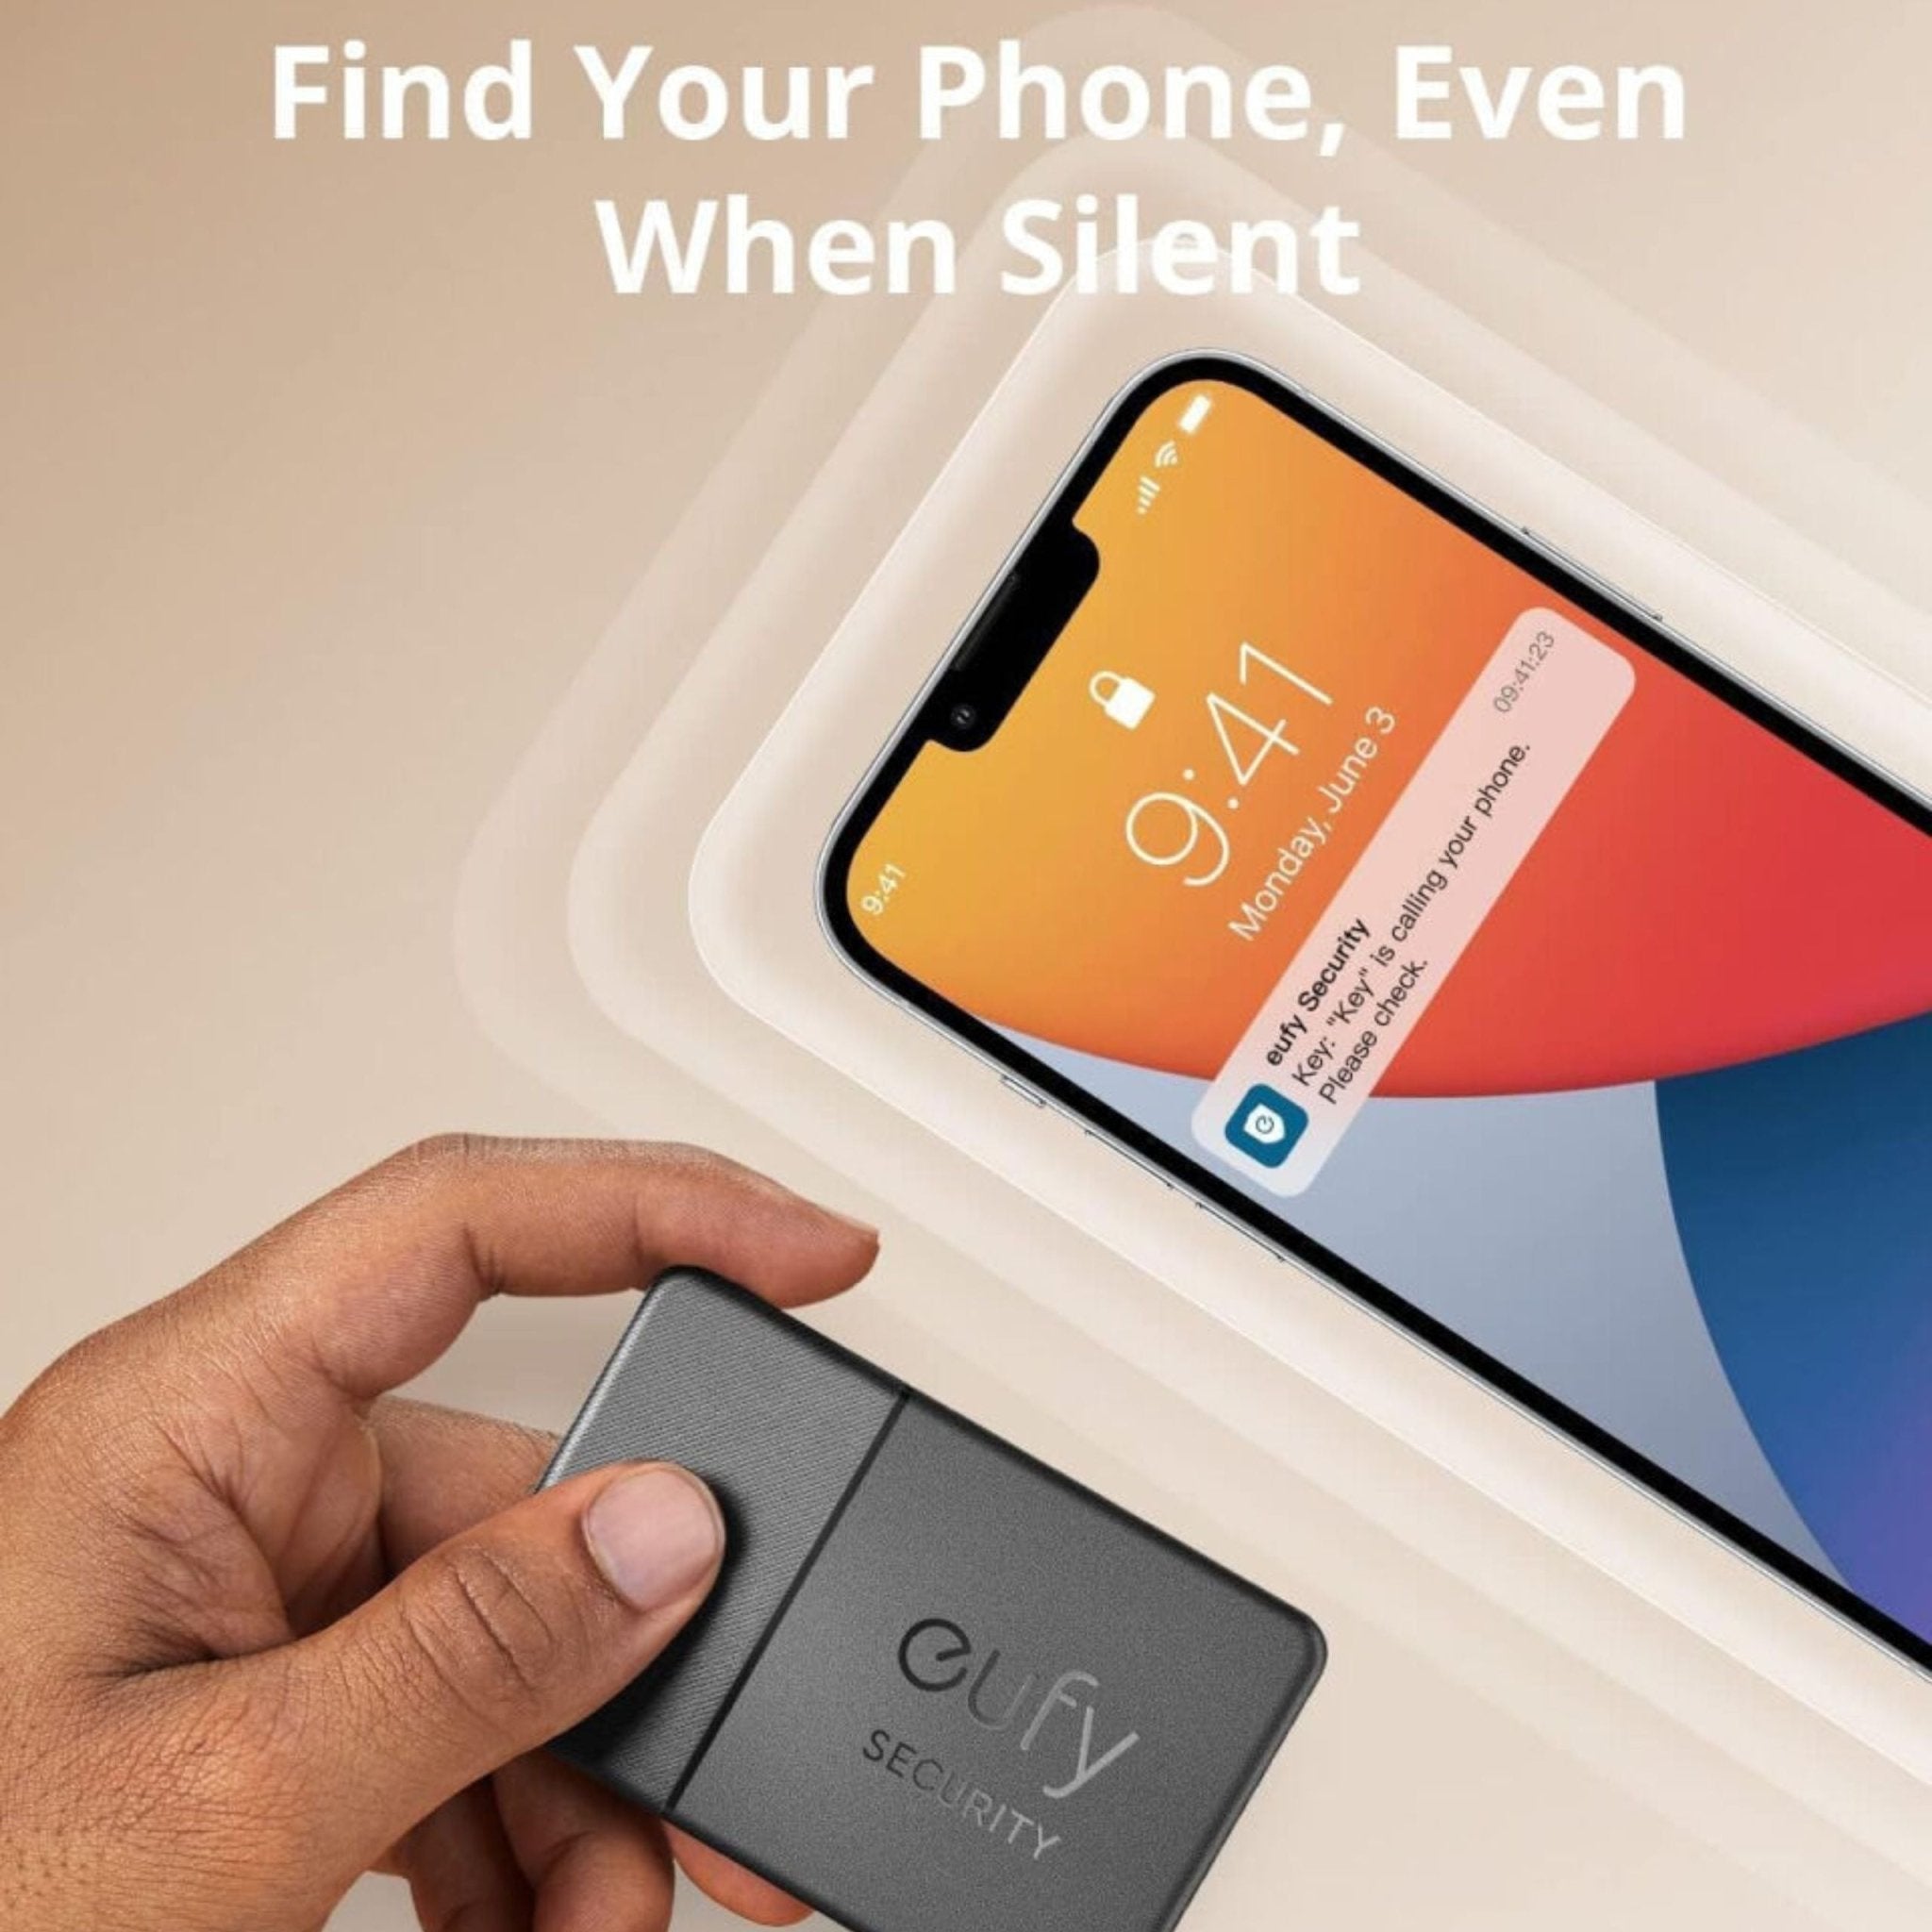 Anker Eufy Smart Bluetooth Tracker Map with Apple Find My App - Black